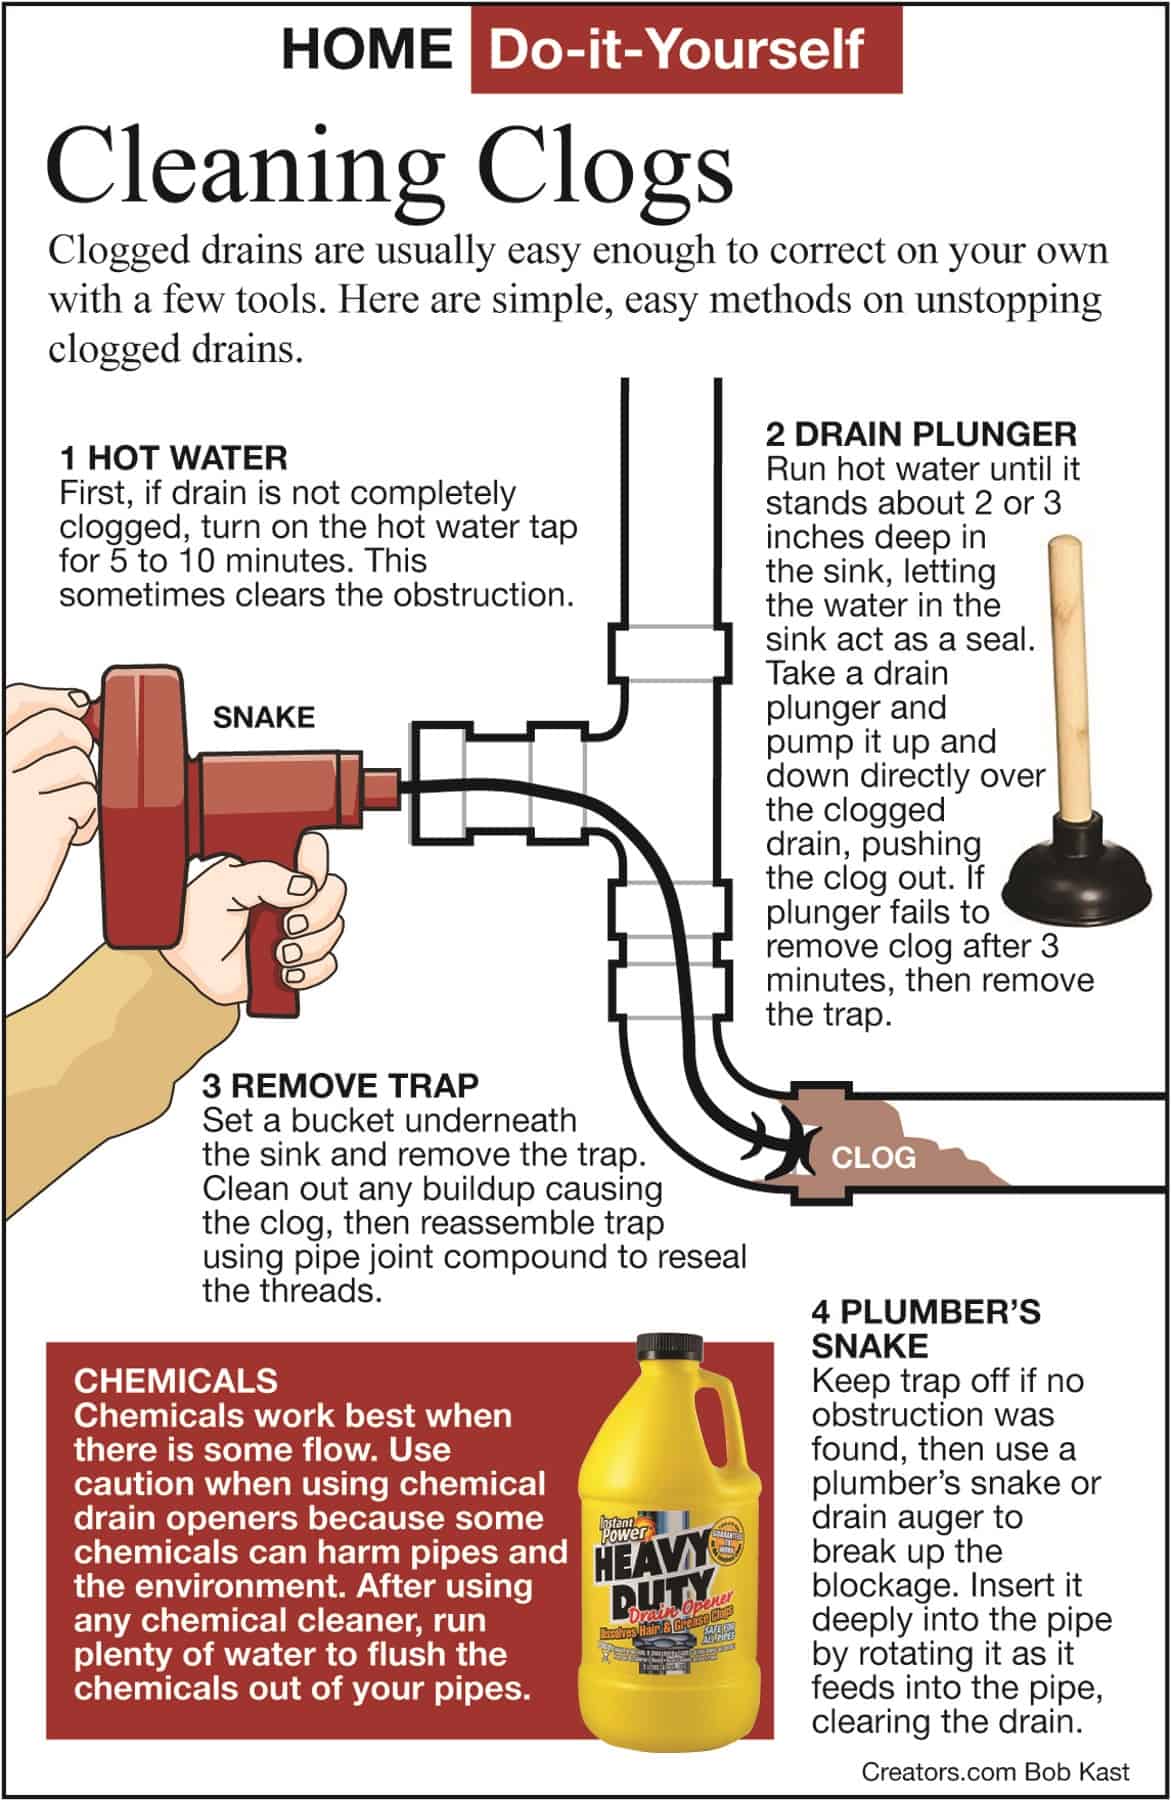 5 Easy Ways to Fix a Clogged Drain // Aquamaster